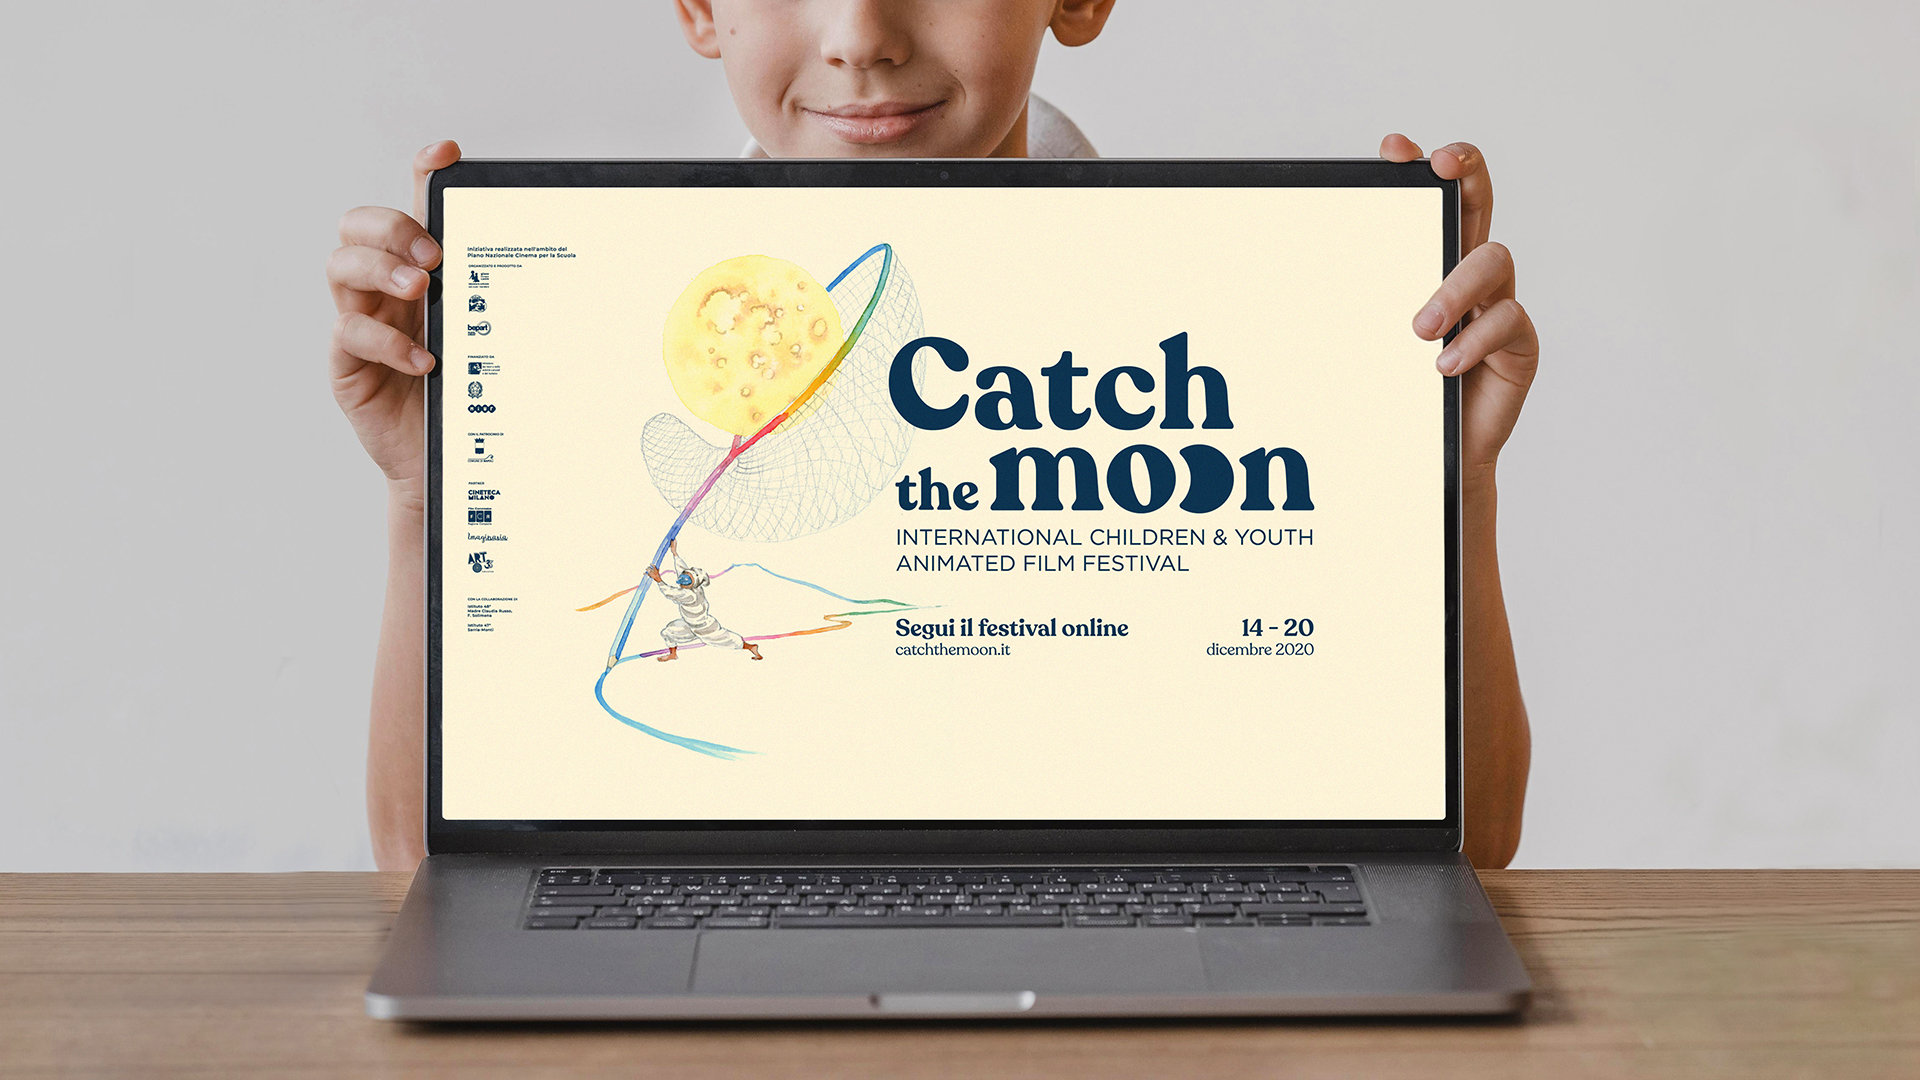 Catch the Moon 2020 [credit: Ufficio Stampa Catch the moon]